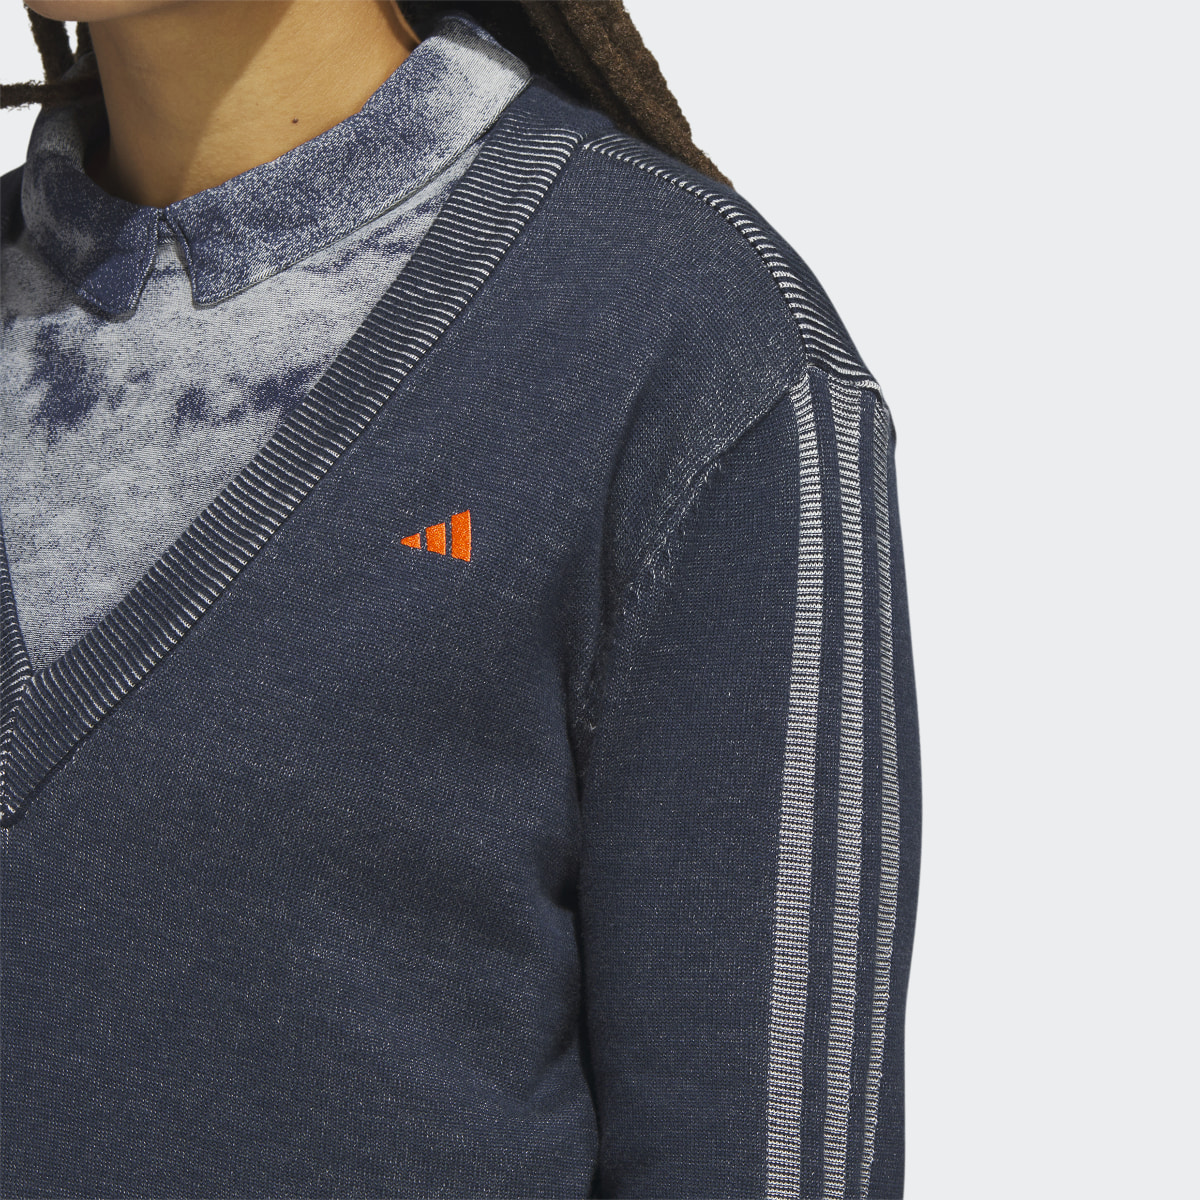 Adidas Made To Be Remade V-Neck Pullover Sweater. 6